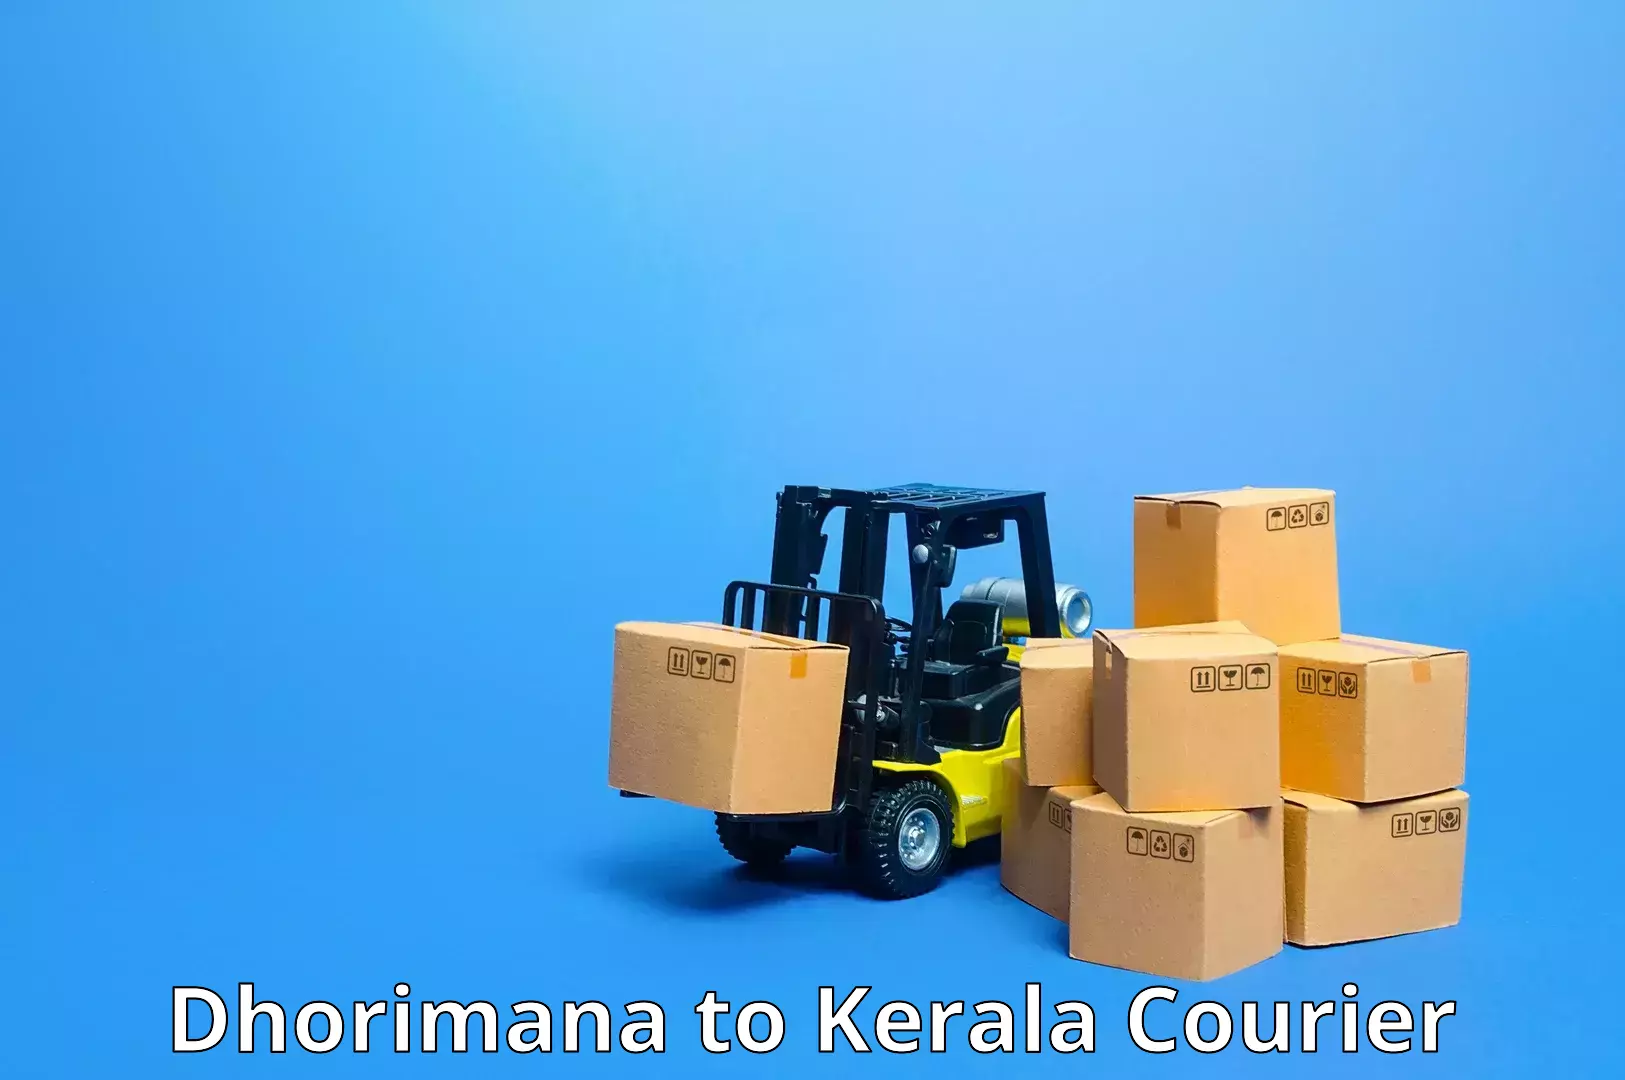 State-of-the-art courier technology Dhorimana to Rajamudy